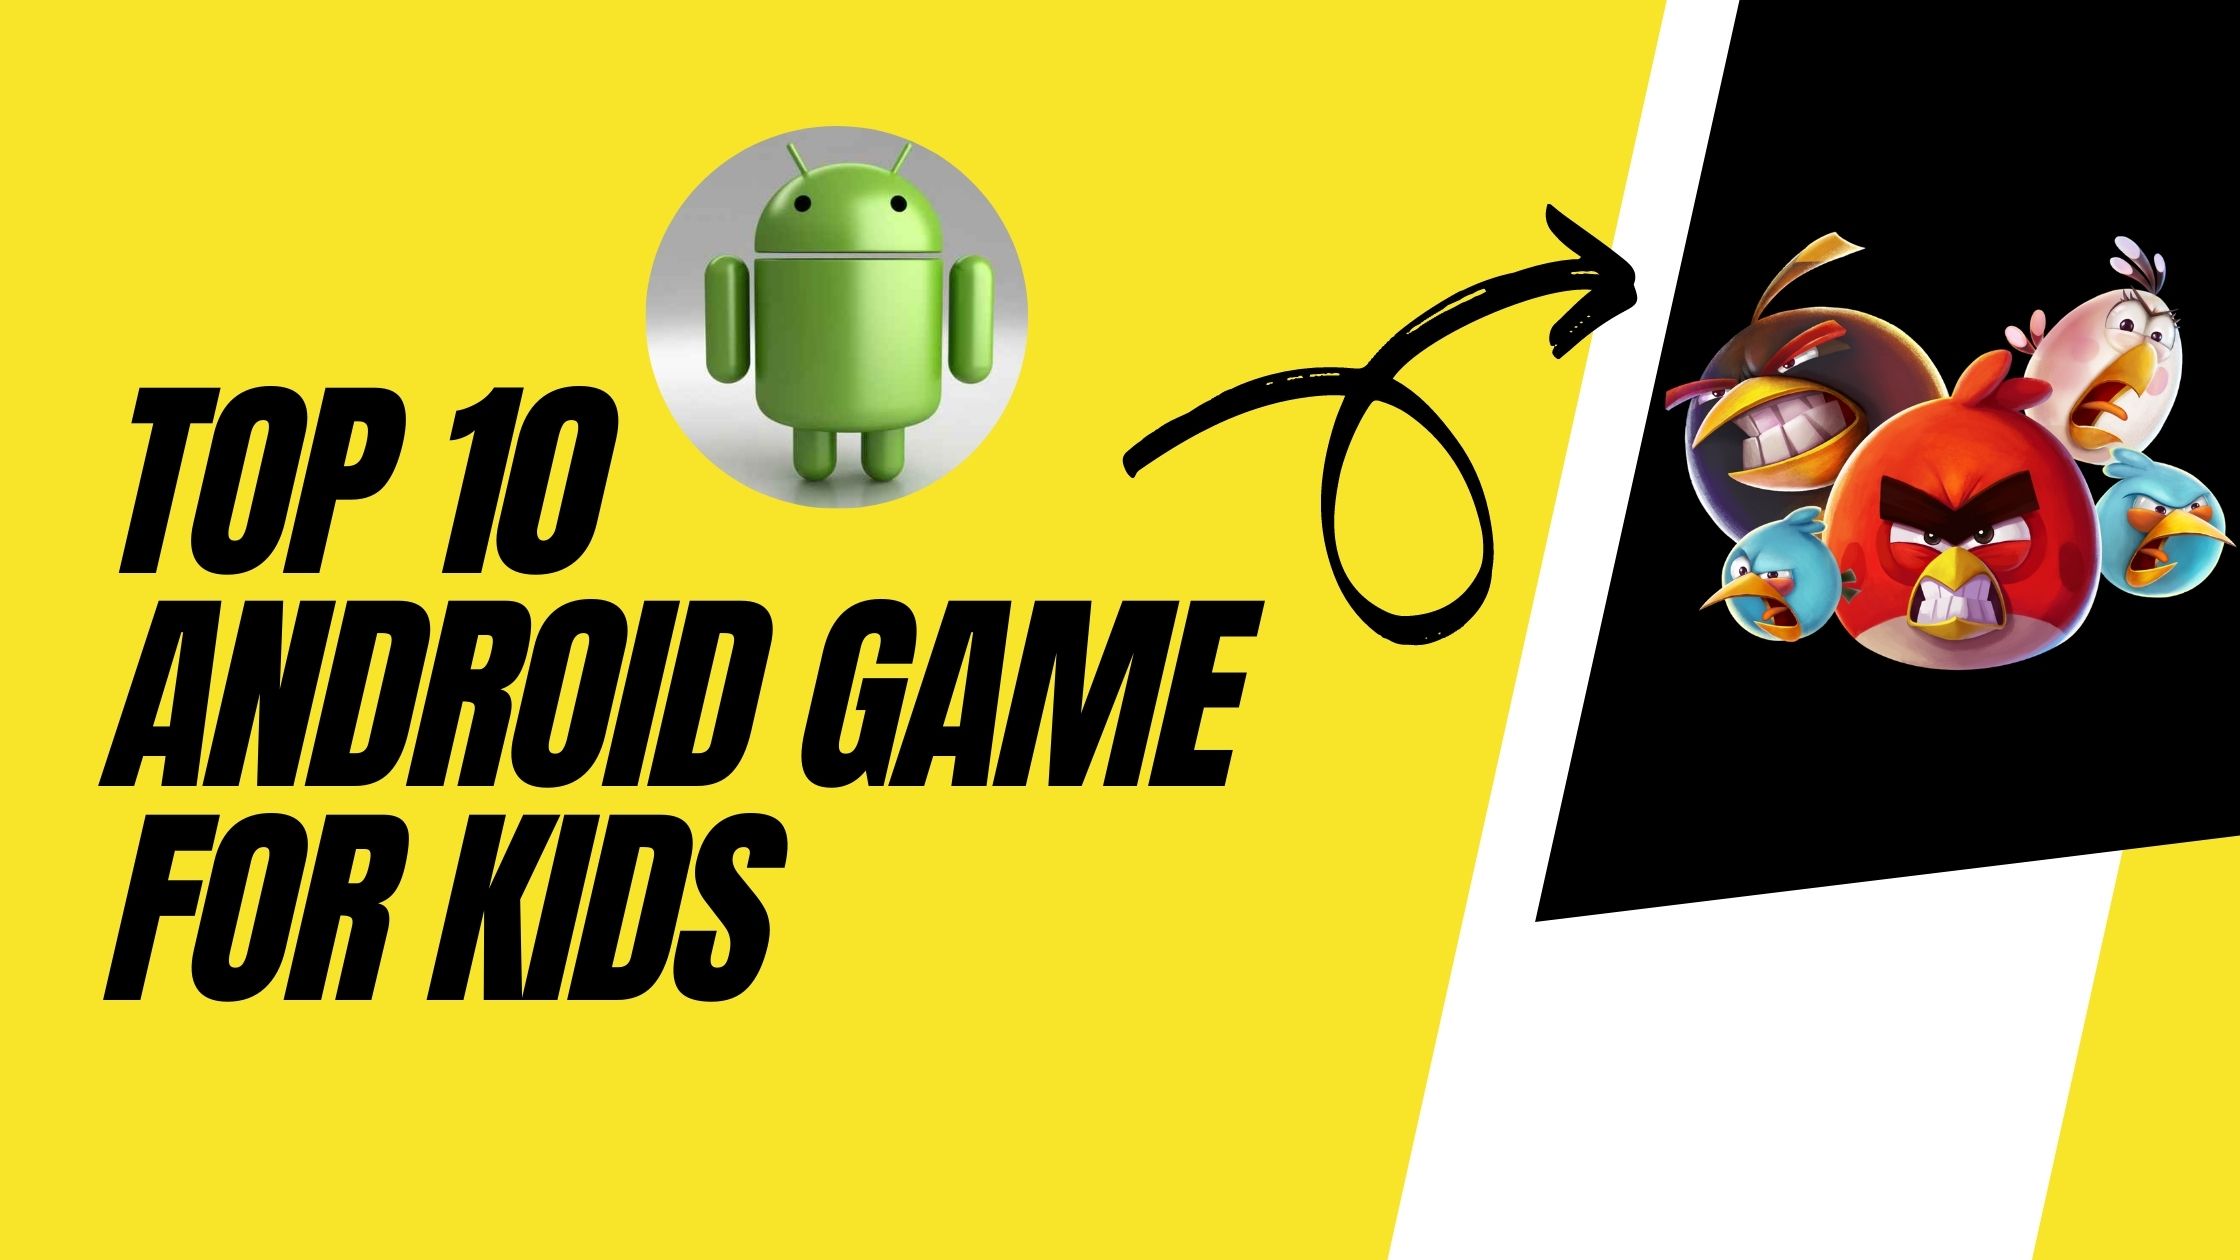  TOP 10 ANDROID GAMES FOR KIDS